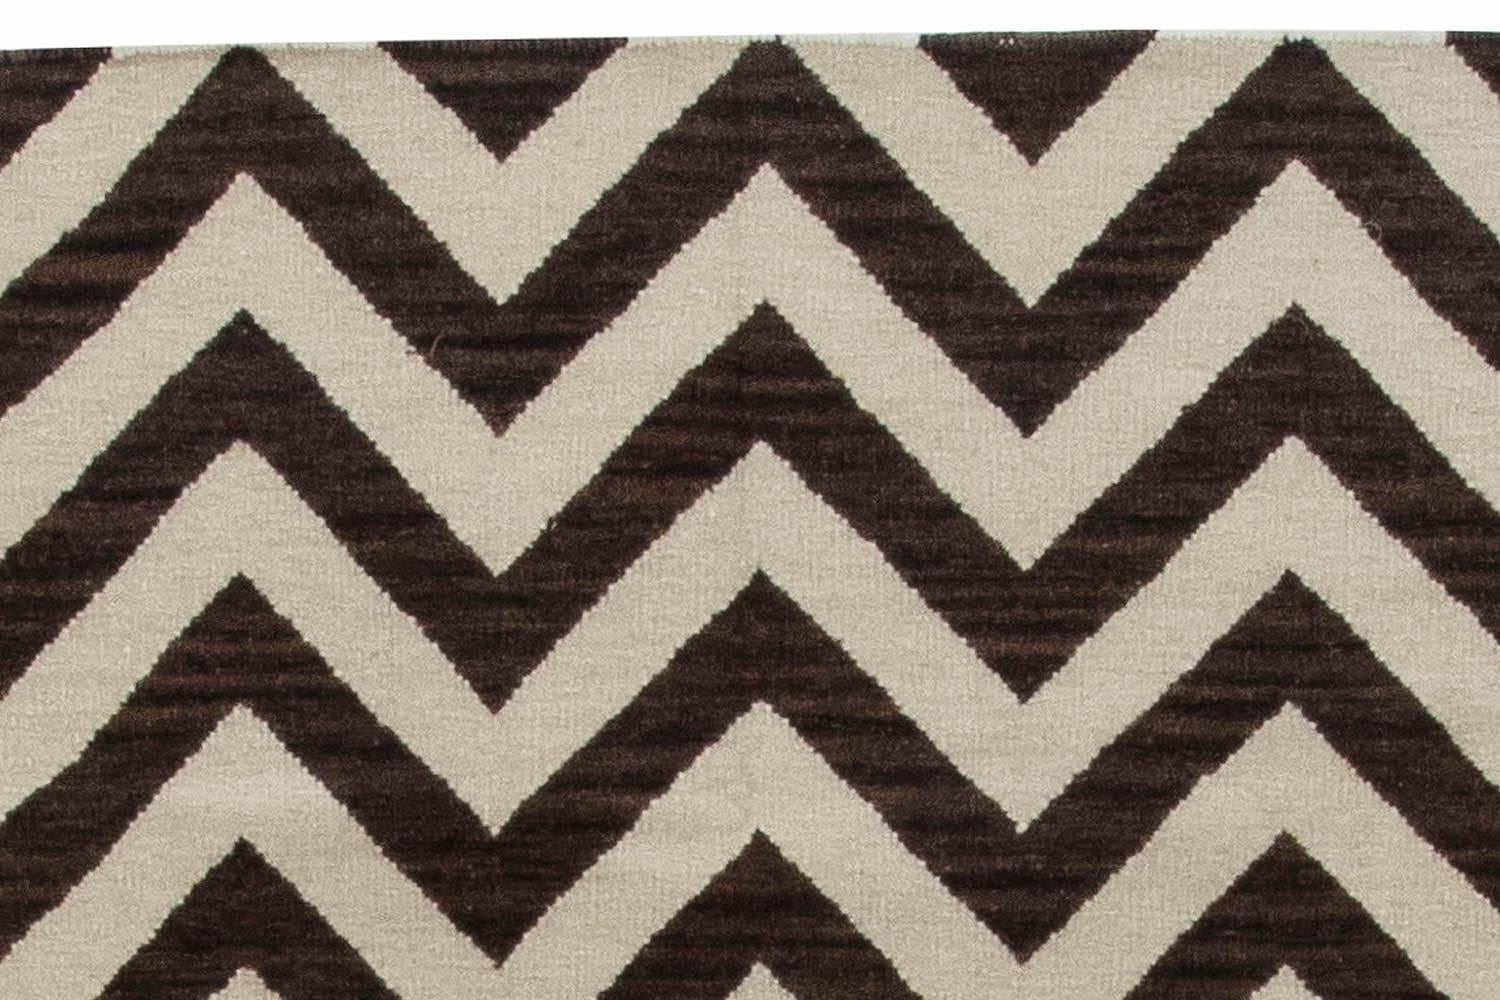 Contemporary Zig-Zag Design Brown, White Wool Rug by Doris Leslie Blau In New Condition For Sale In New York, NY